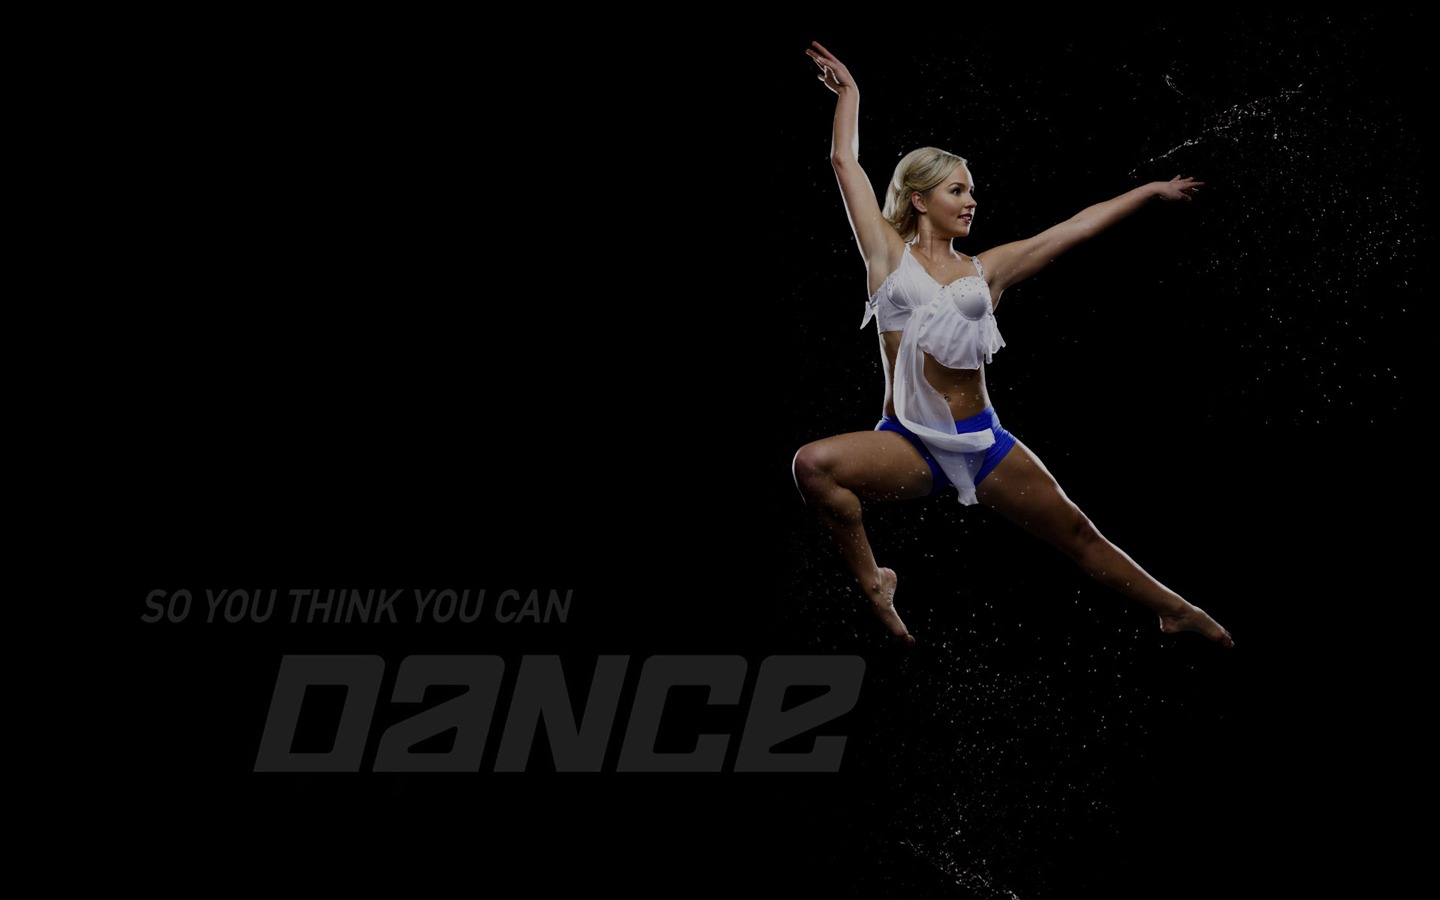 So You Think You Can Dance wallpaper (2) #11 - 1440x900